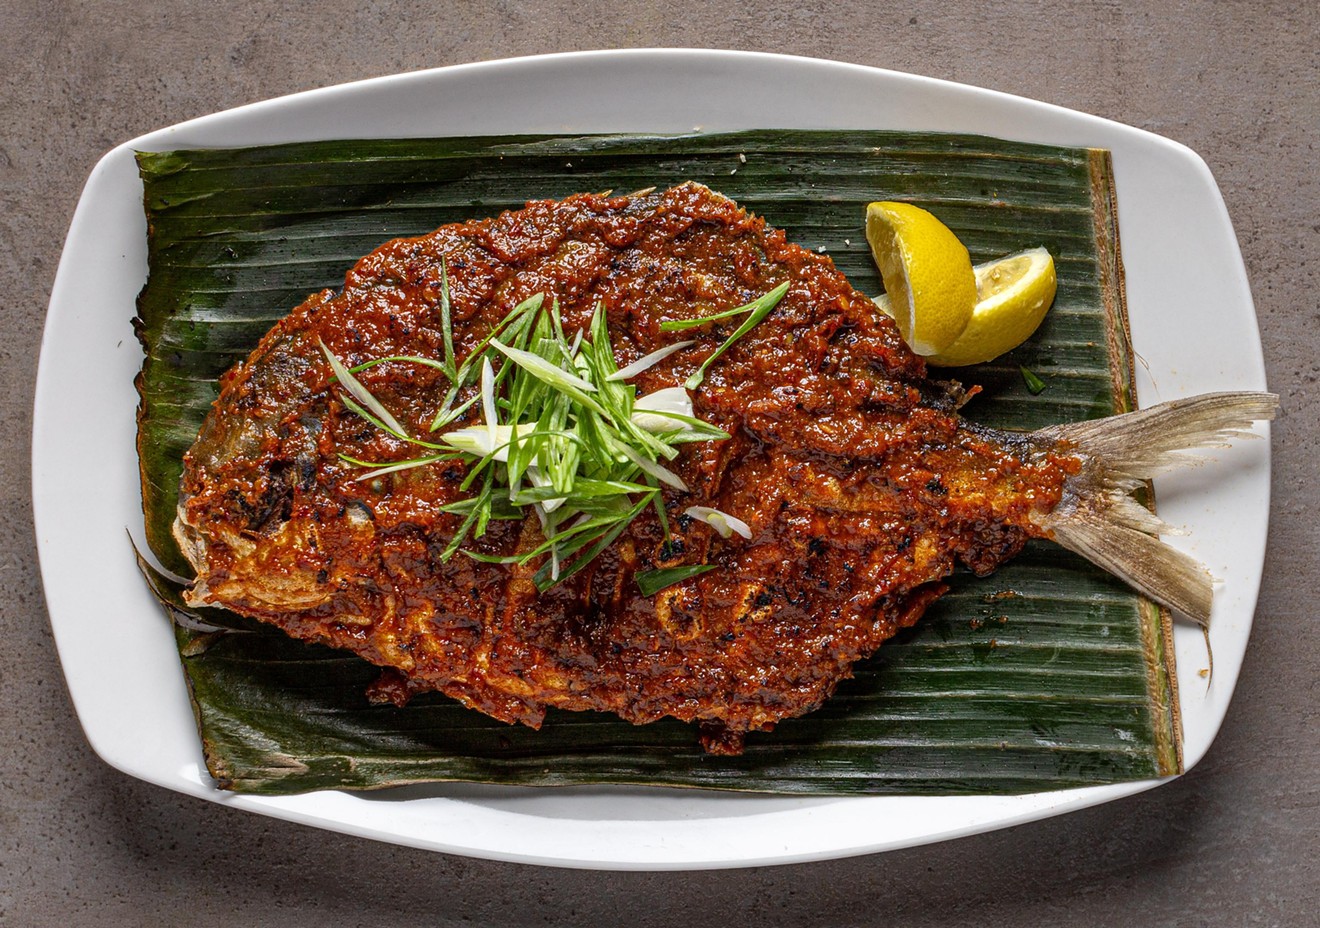 Celebrate Lenten season with Malaysian offerings at Phat Eatery, including this sharable whole golden fish.